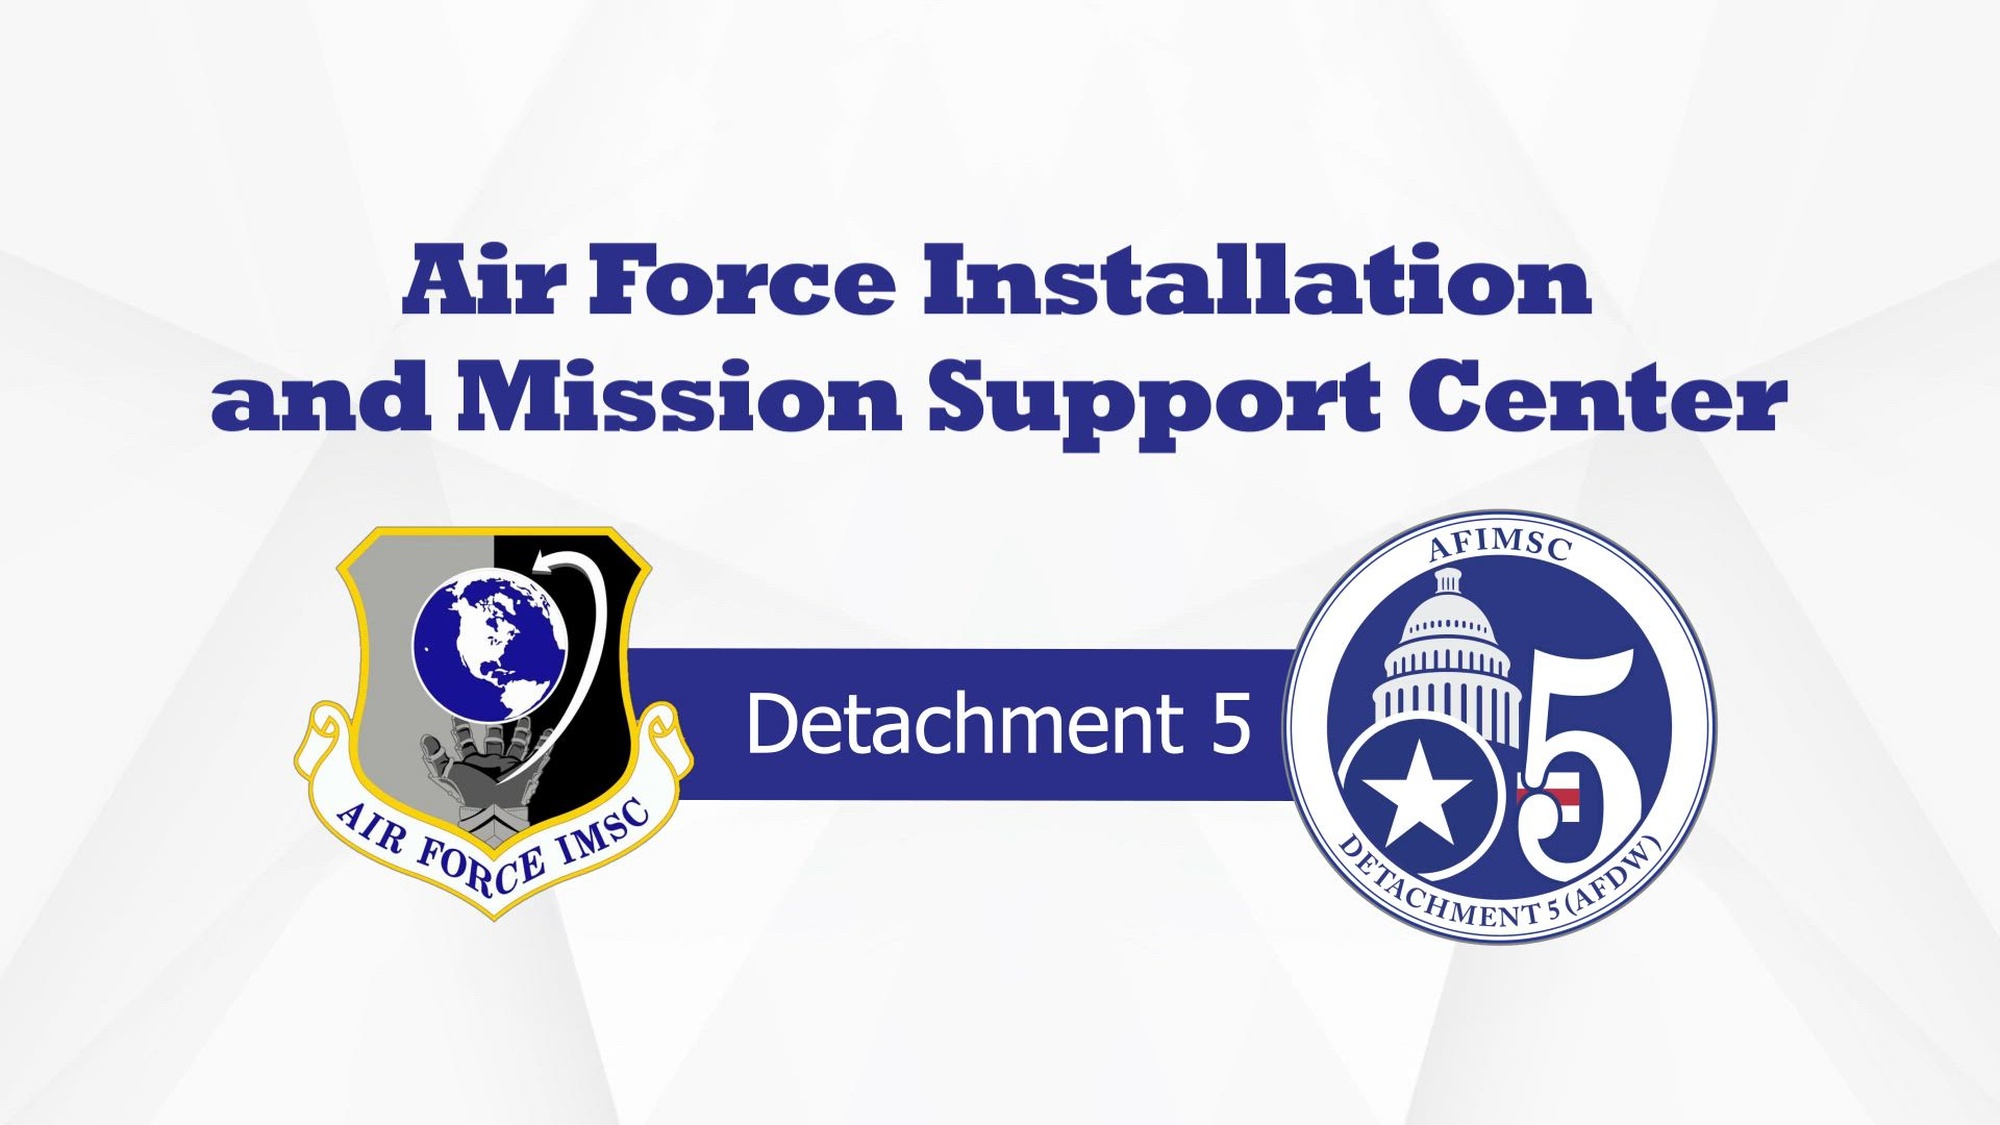 Air Force Installation and Mission Support Center Detachment 5 provides critical installation and mission support services to AFDW that enables AFDW to bring air and cyberspace capabilities to the joint team protecting the nation's capital and support local personnel and those serving worldwide.